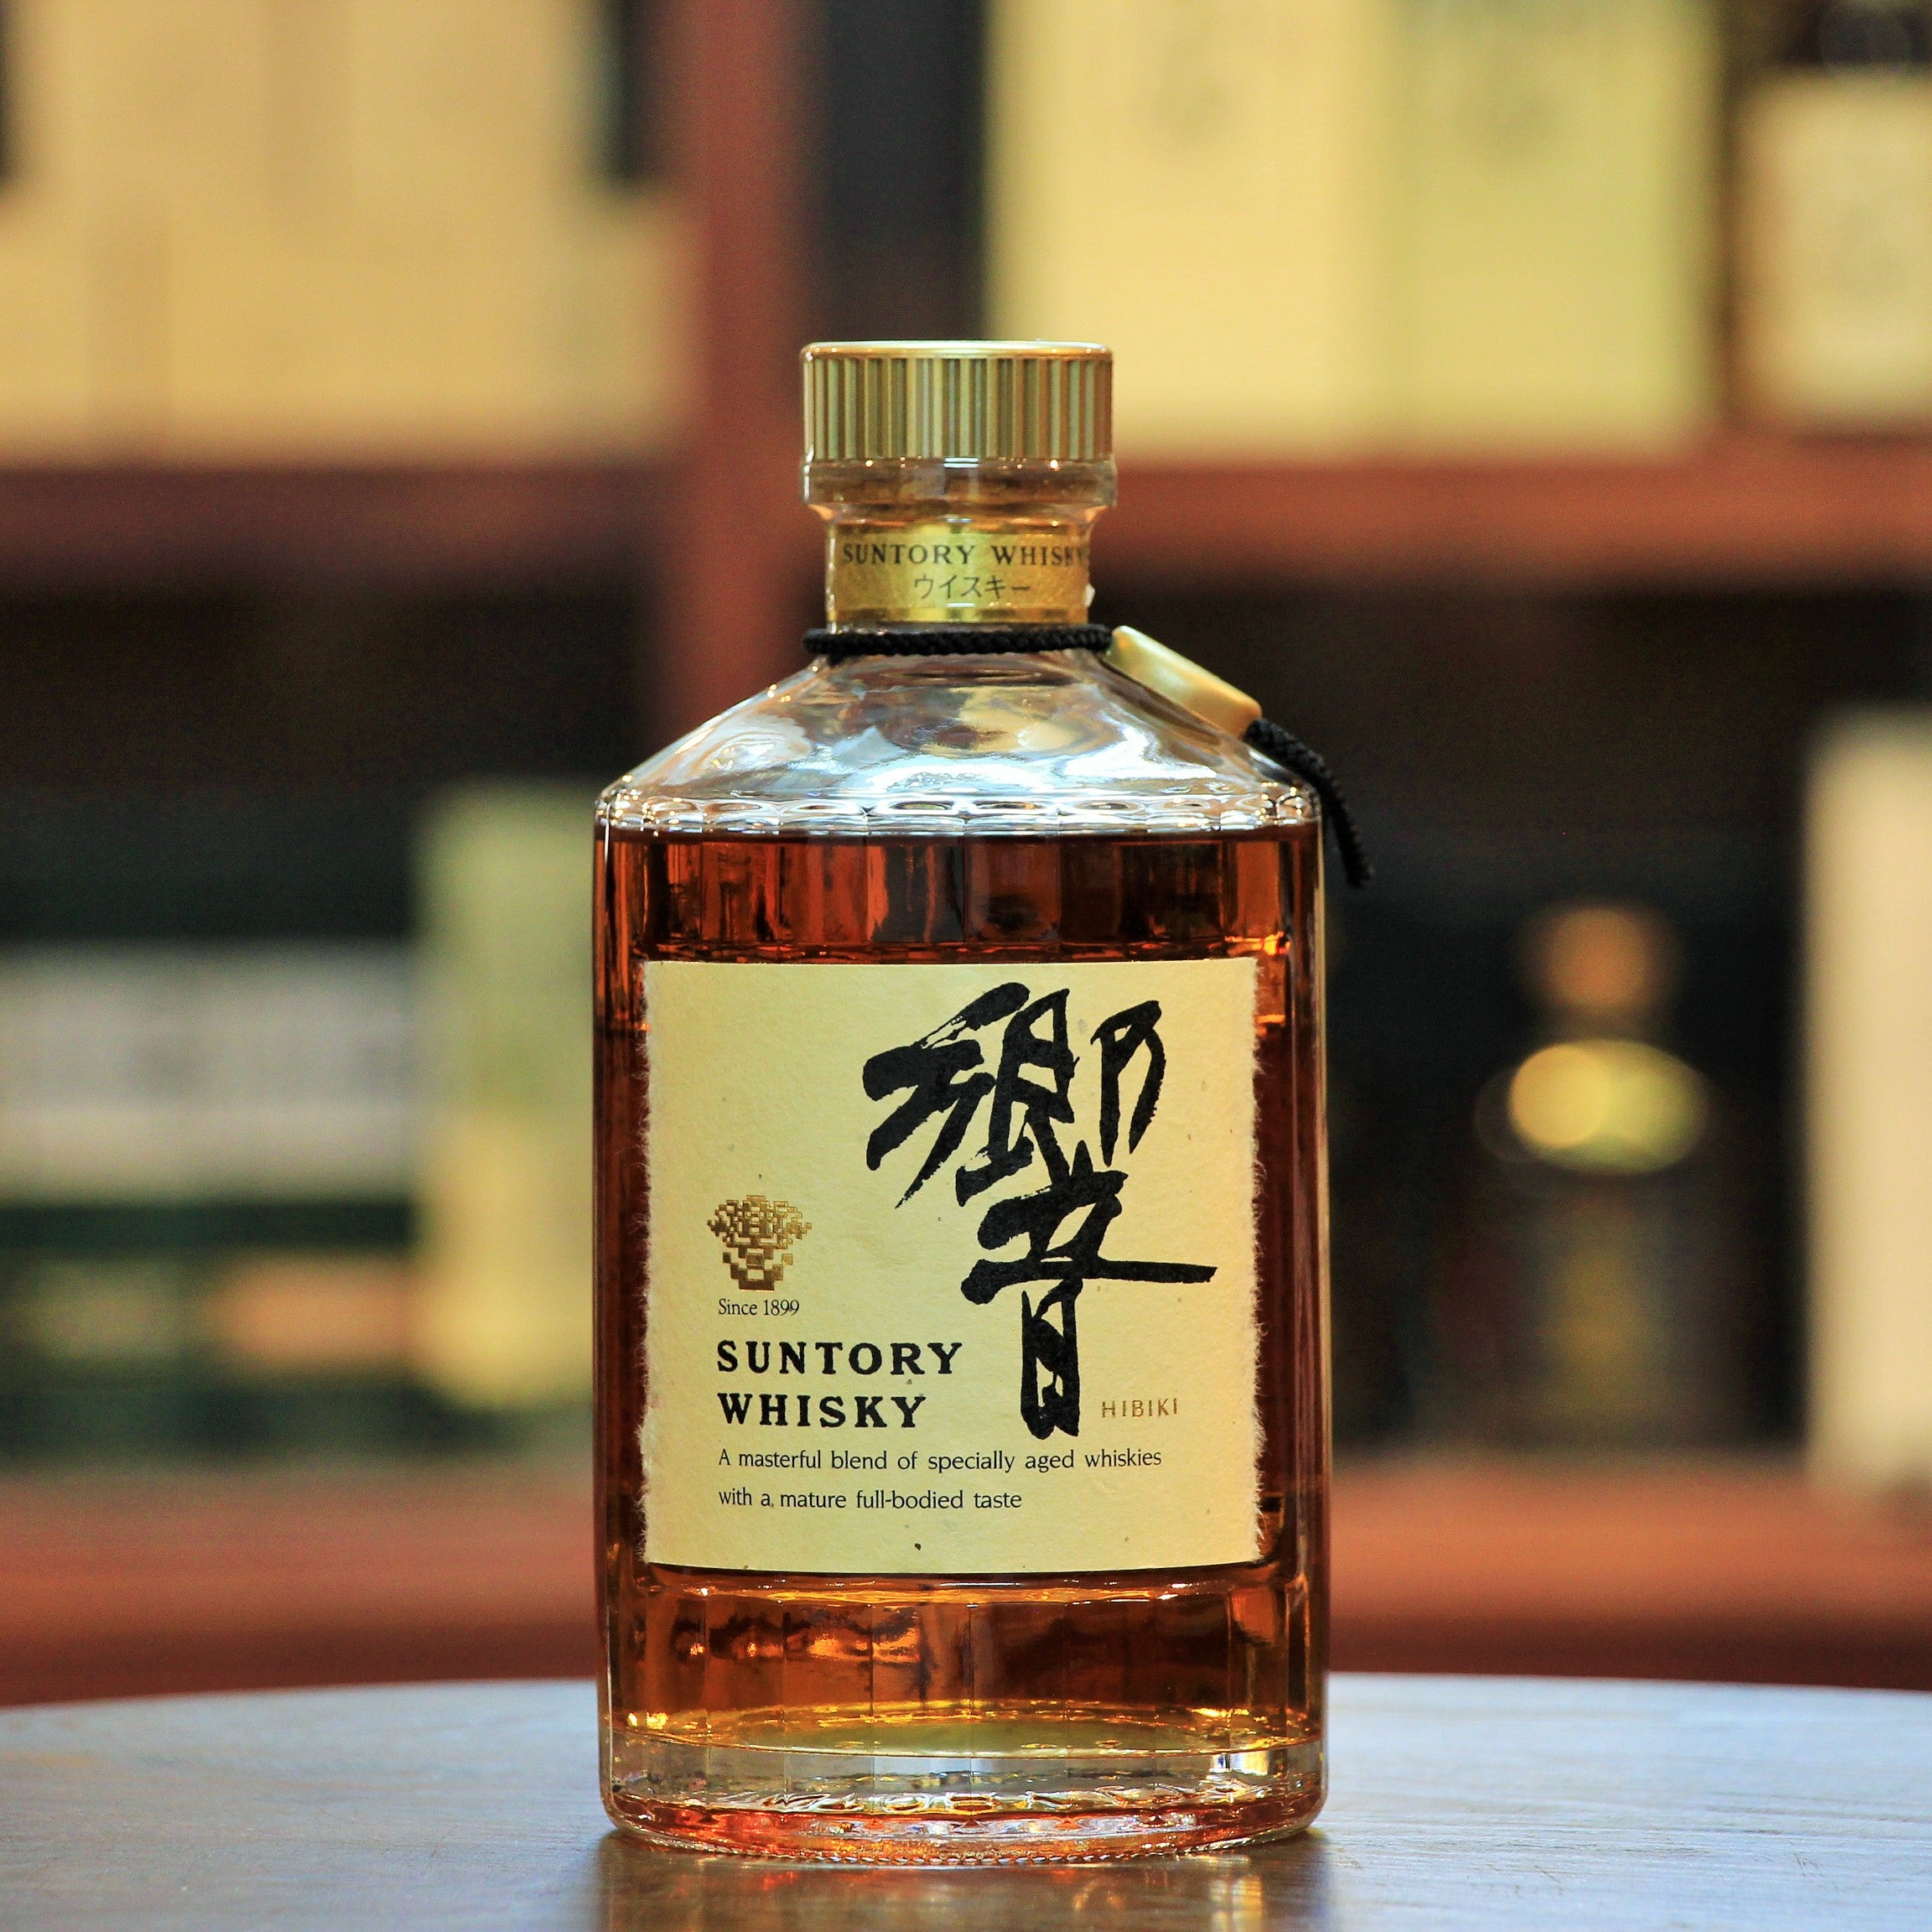 Hibiki Gold Cap 17 Years Vintage Old Bottling, This was one of the earlier Hibiki bottlings released, as Suntory was still perfecting the labelling and branding of this amazing blend. While the age is not explicitly stated, it is reported to be a 17 years old Hibiki.